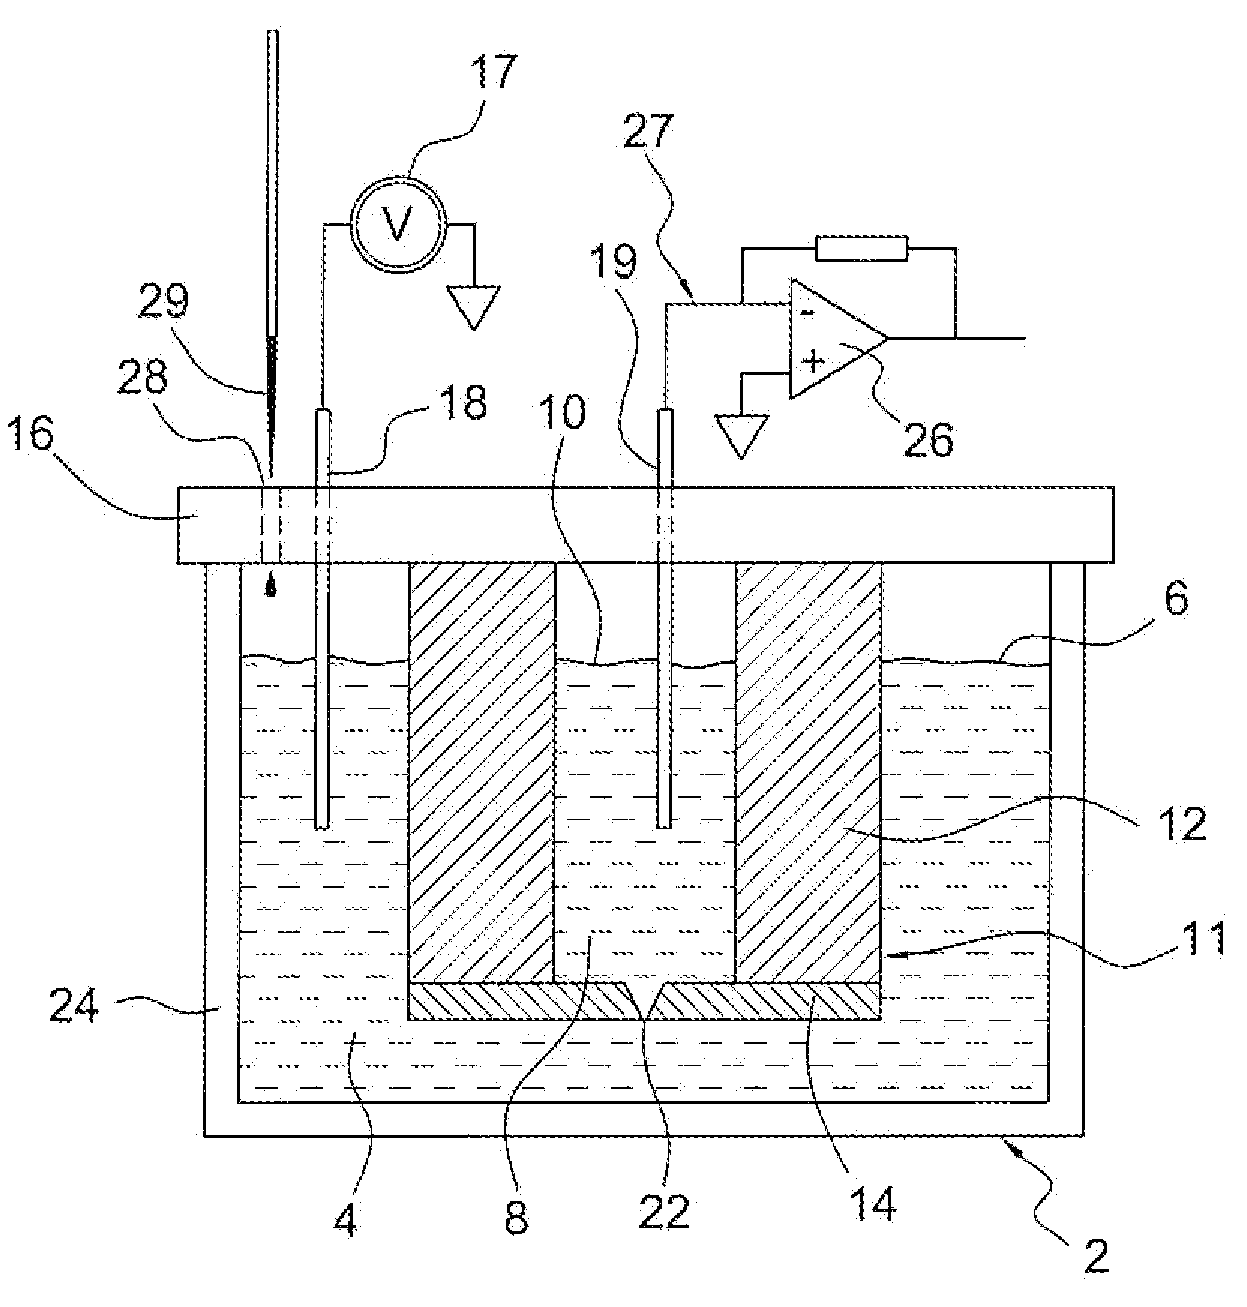 Apparatus and Method for Sensing a Time Varying Ionic Current in an Electrolytic System